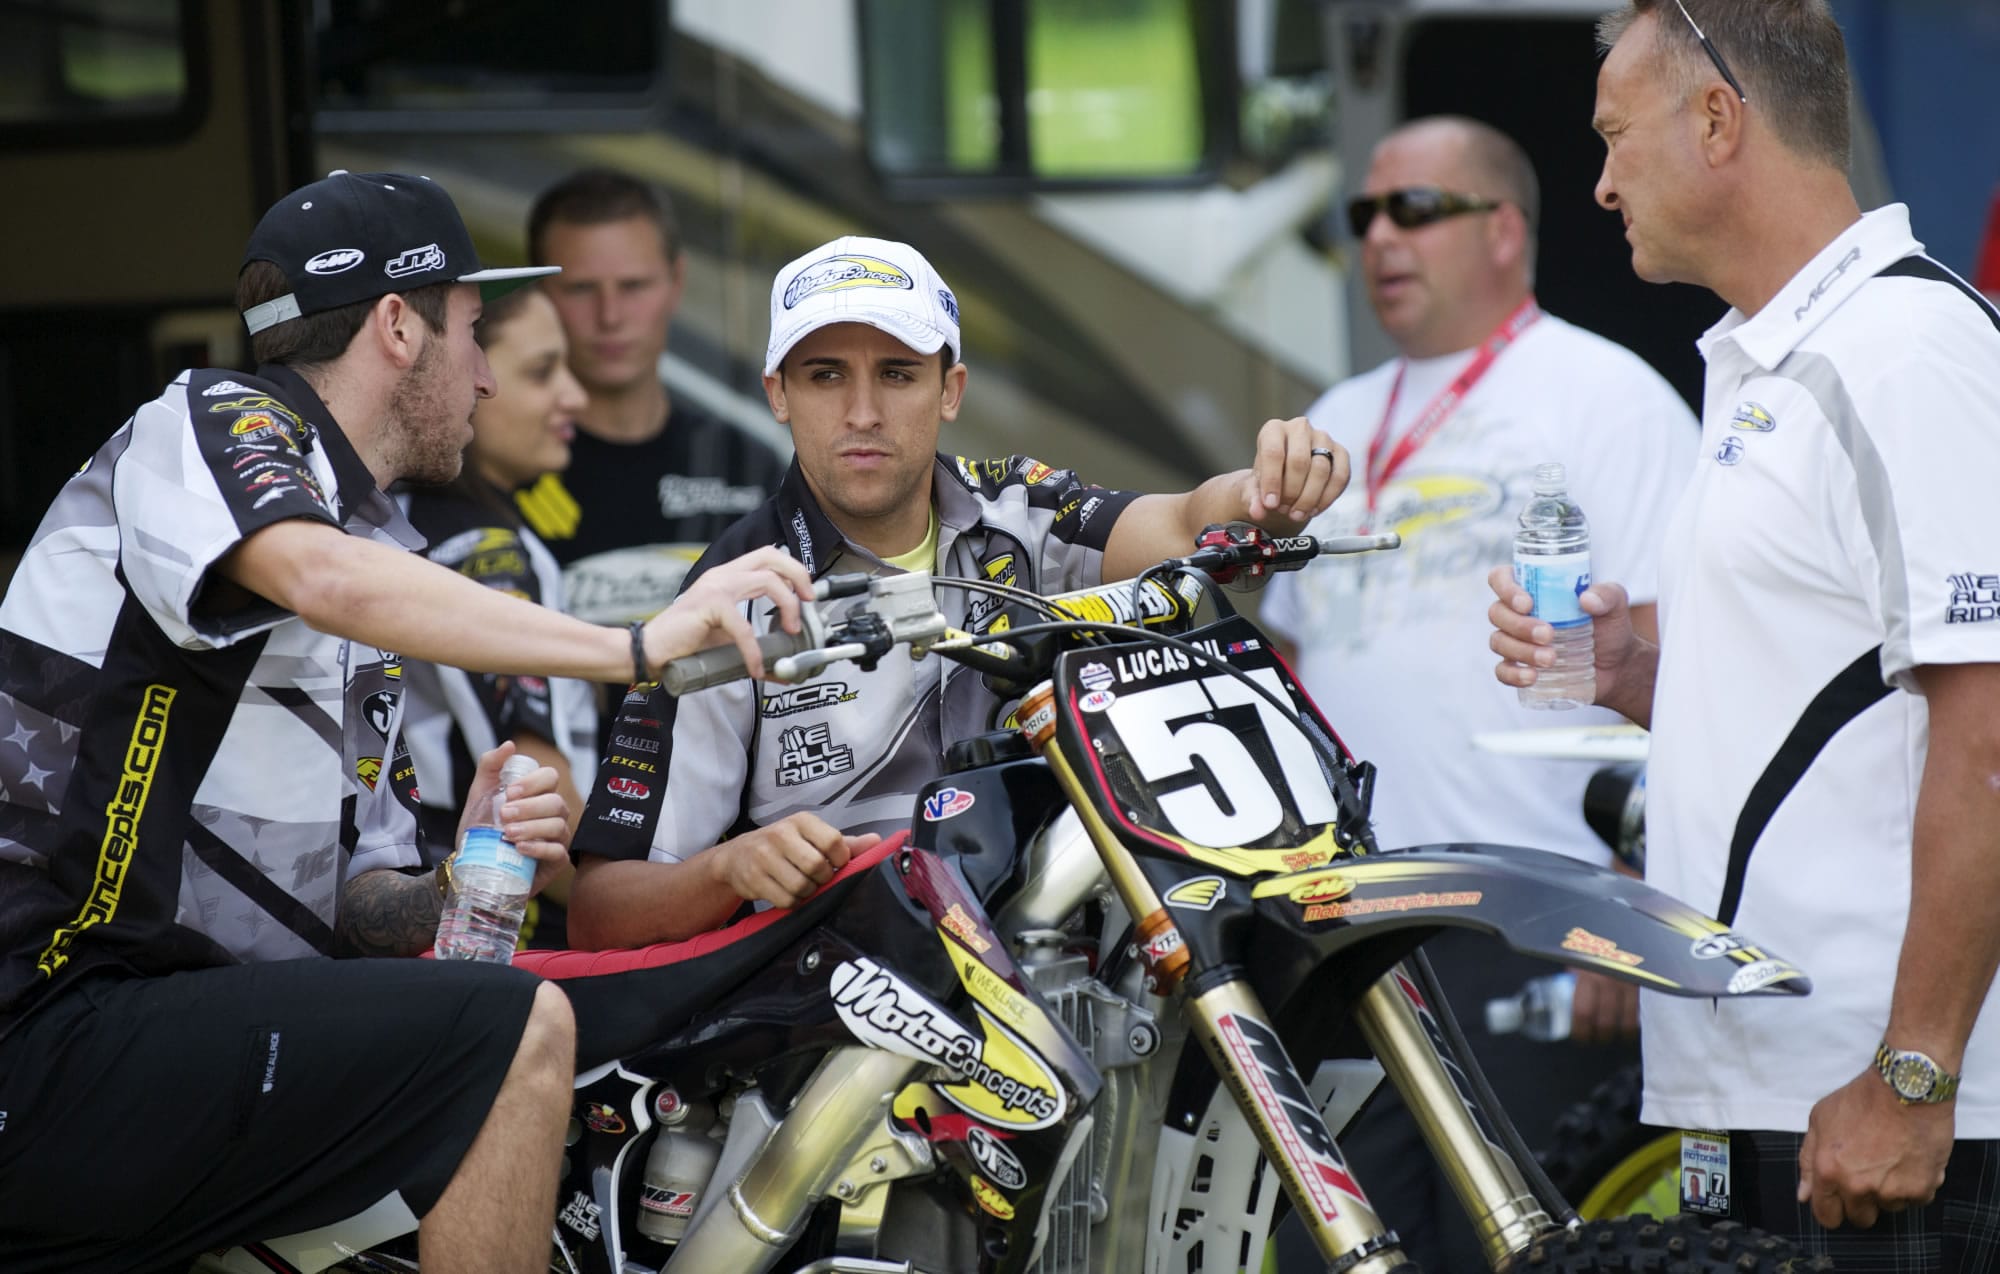 Mike Alessi, center, talks with teammate Jake Canada, left, and team owner Mike Genova prior to Thursday's practice session at Washougal MX Park.